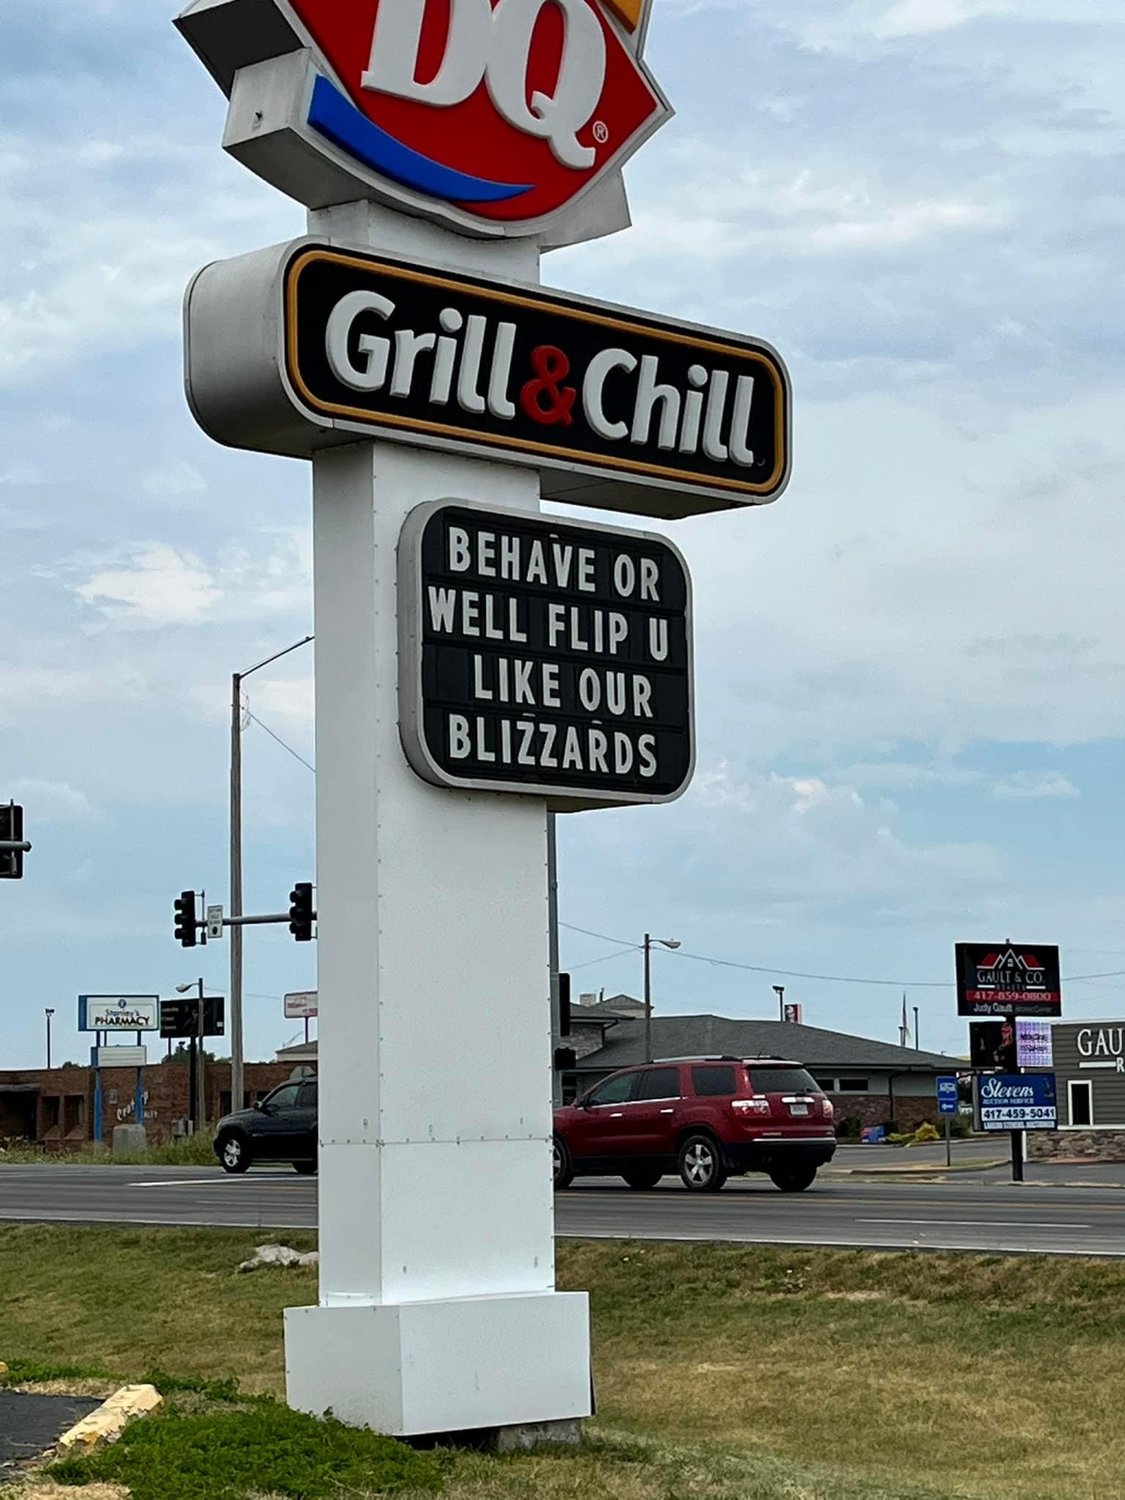 Dairy Queen offered some “ice” for the multiple “burns” directed for McDonalds.